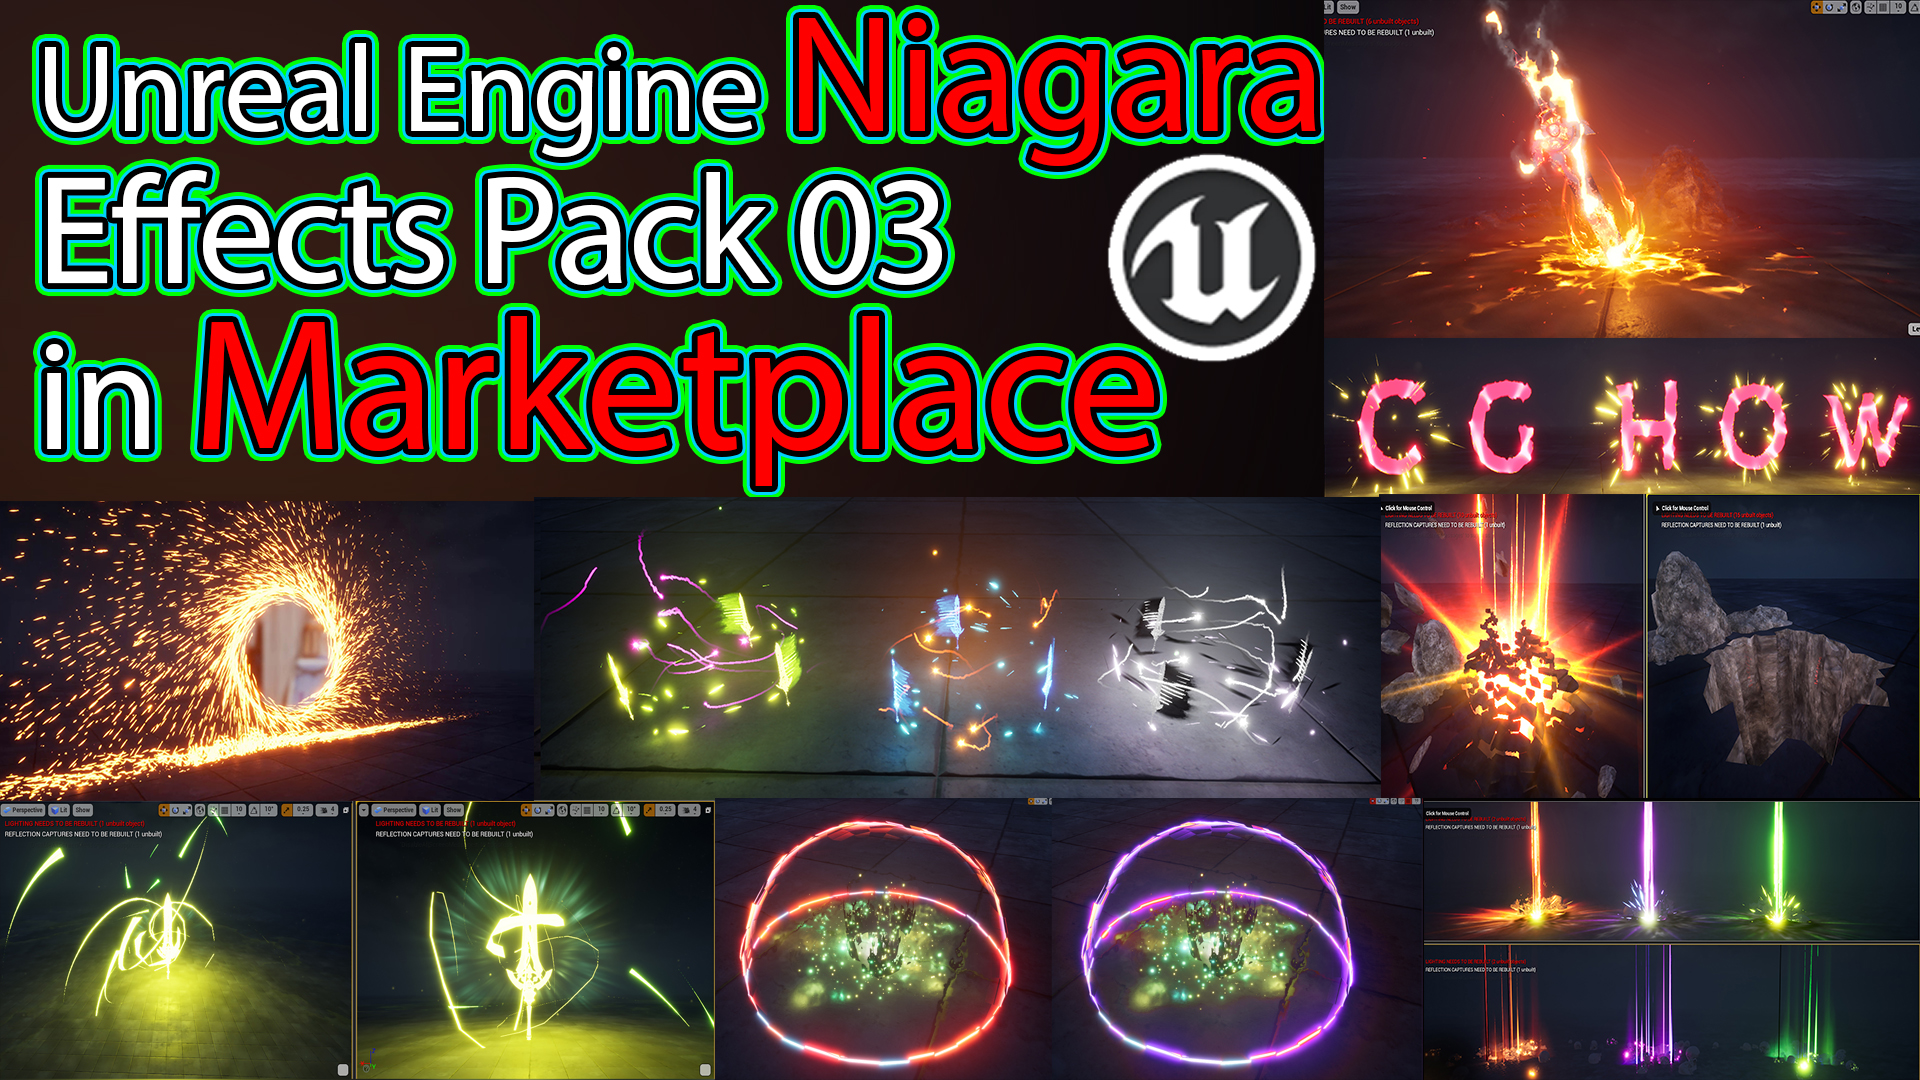 Unreal Engine Niagara Effects Pack 03 in Marketplace